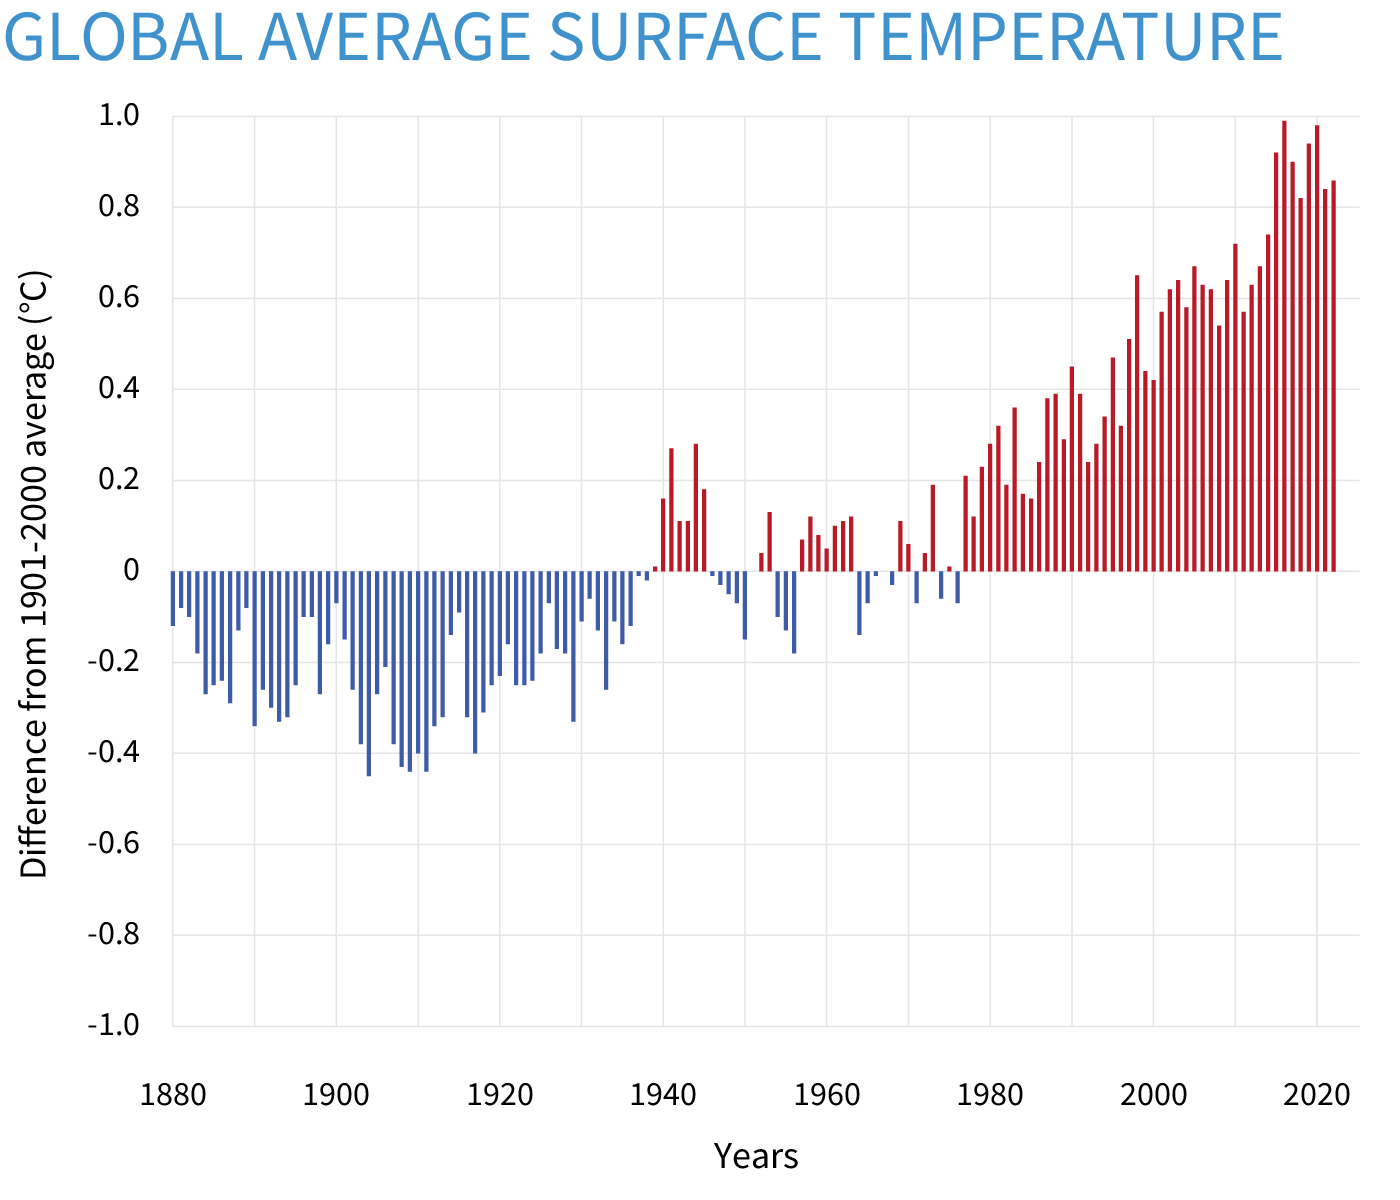 Climate Change Global Temperature NOAA Climate.gov